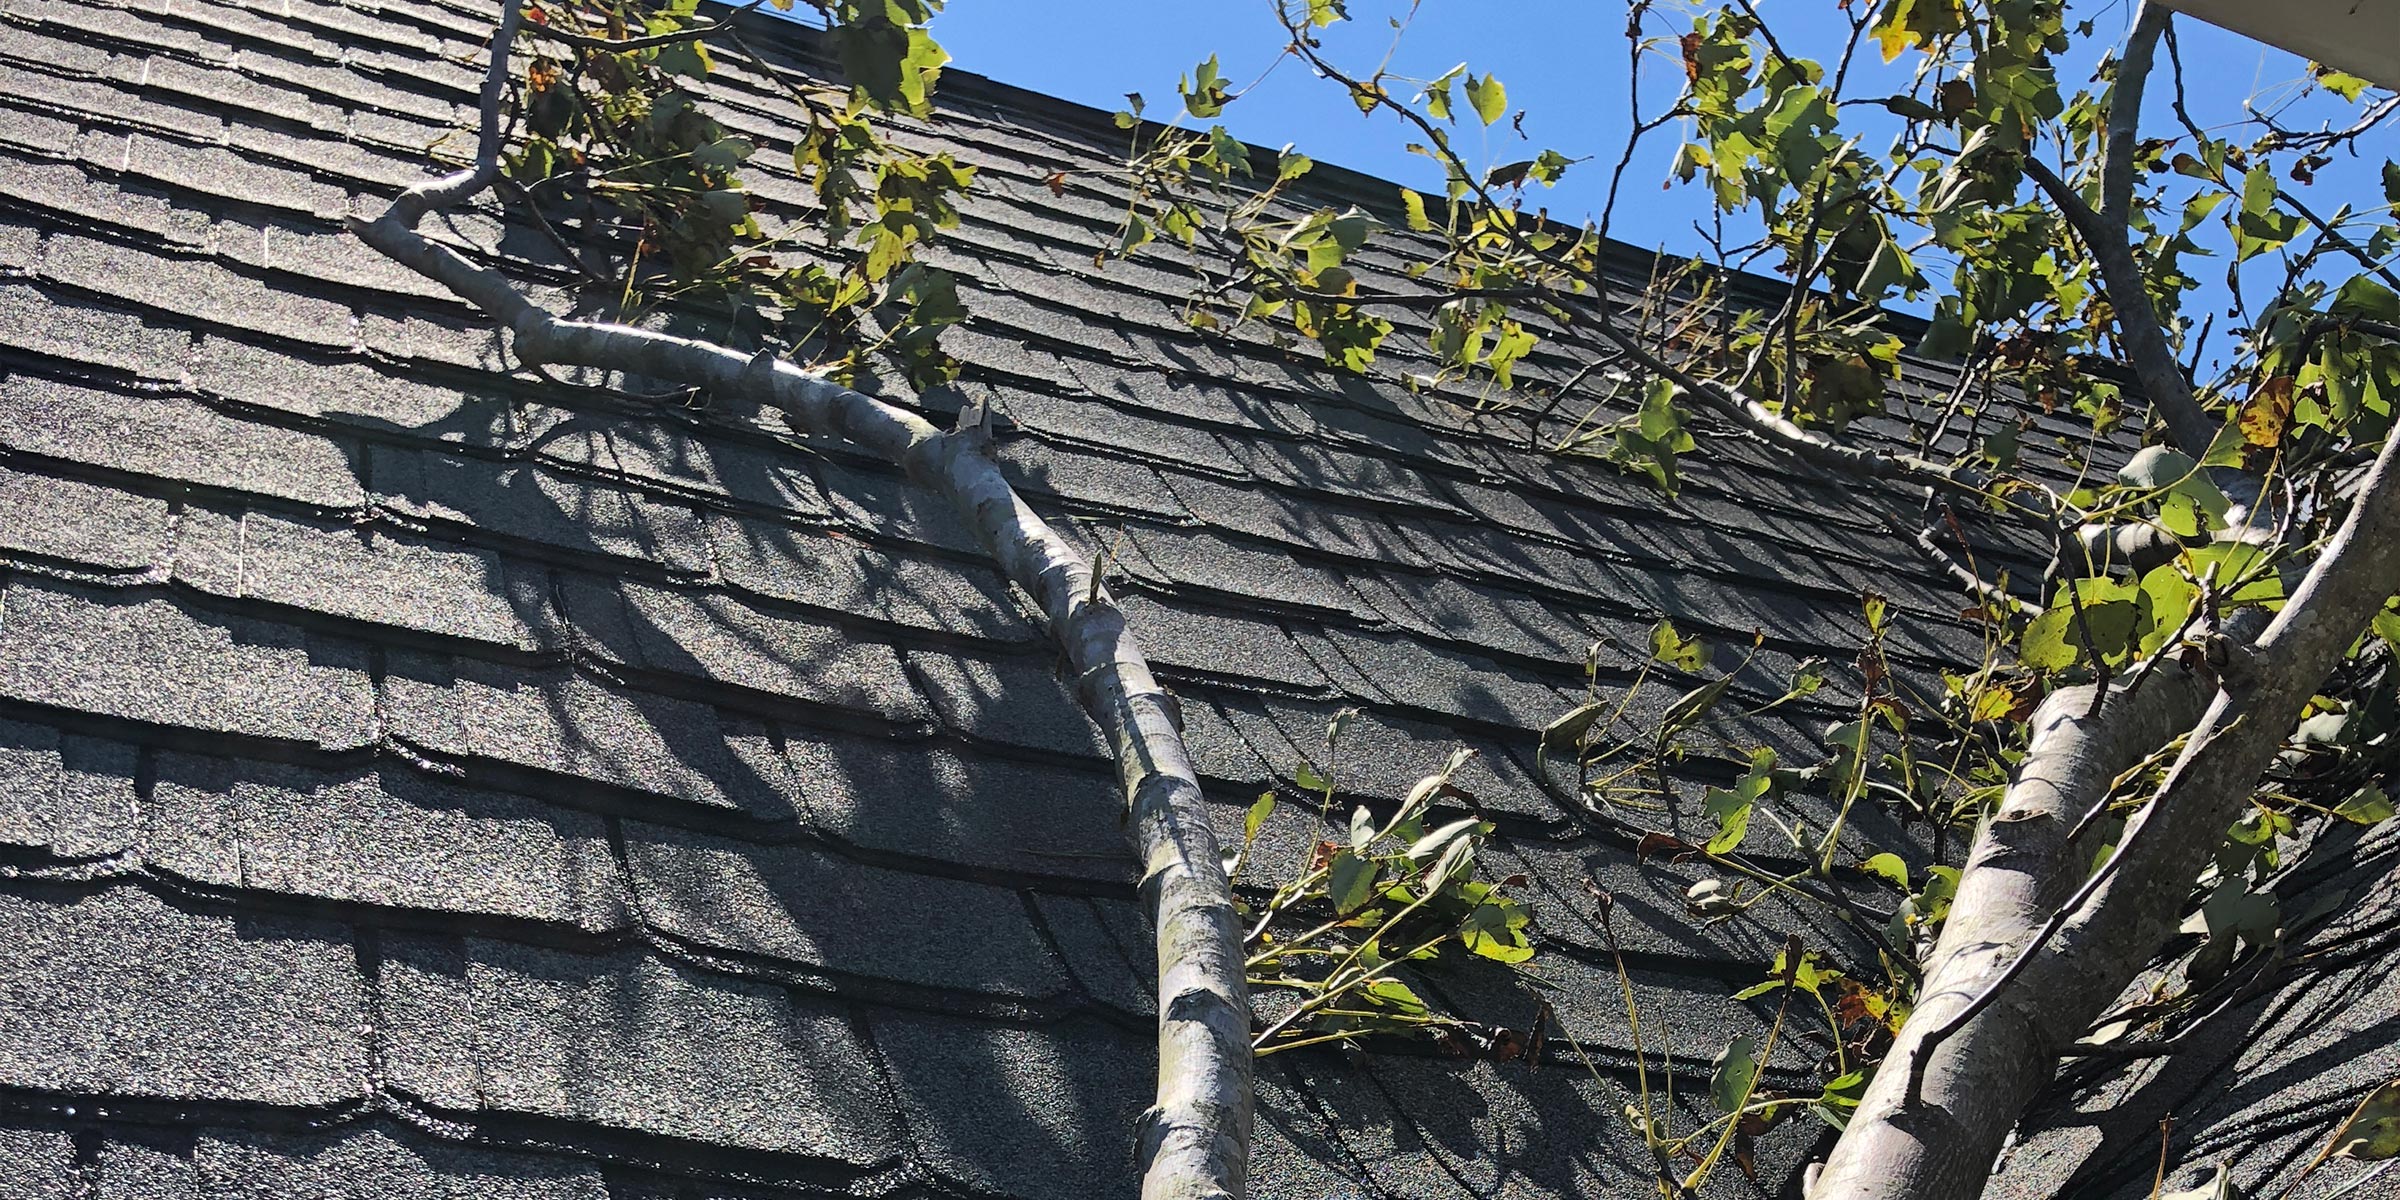 How to Safely Identify Roof Damage After a Storm